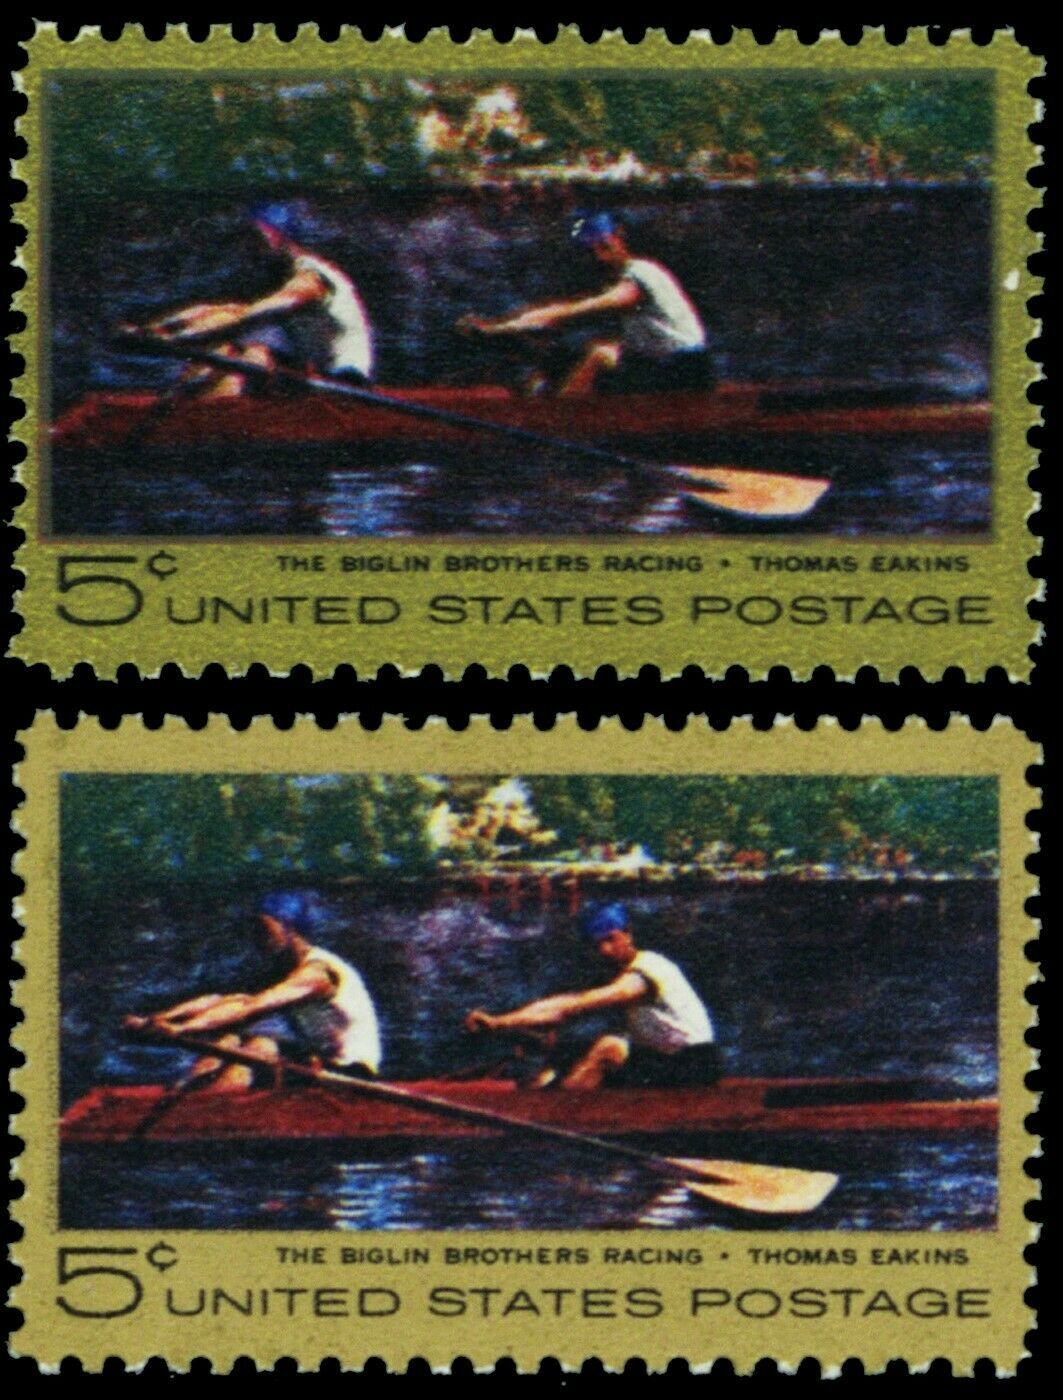 Primary image for 1335, MNH 99% of Gold Color Missing Error With Normal Stamp - Stuart Katz